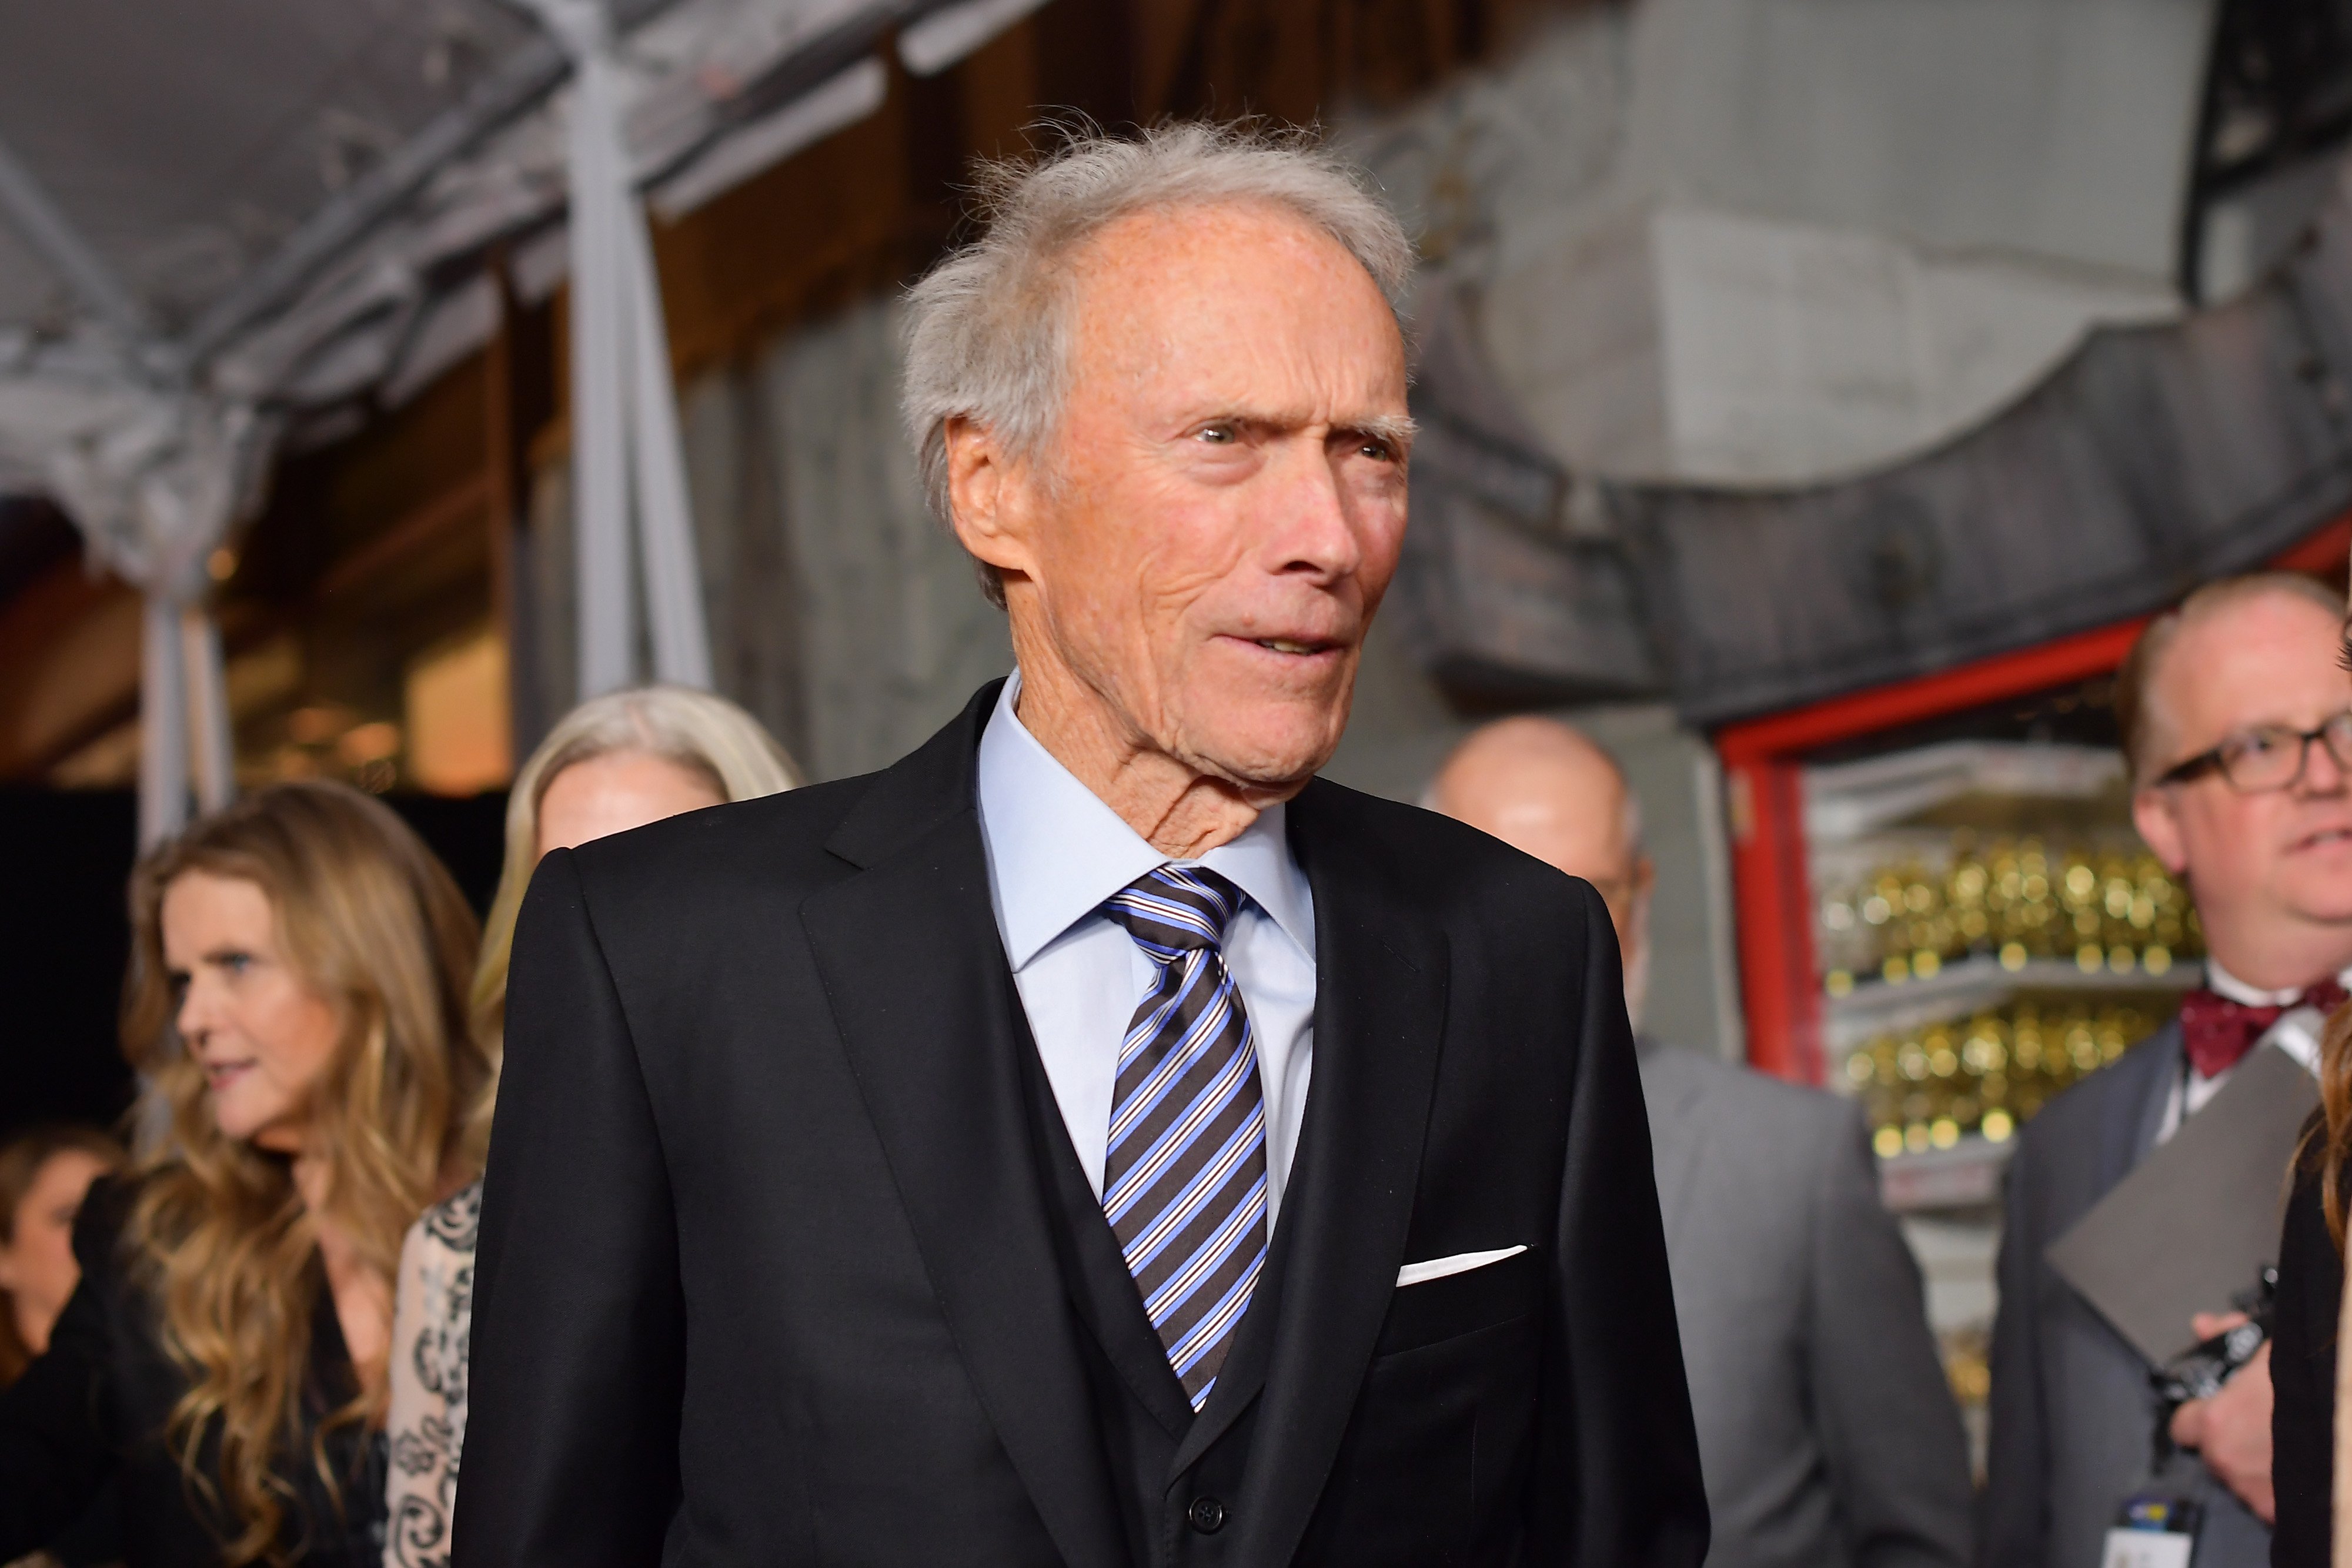 Clint Eastwood attends the "Richard Jewell" premiere during AFI FEST 2019 Presented By Audi at TCL Chinese Theatre on November 20, 2019, in Hollywood, California. | Source: Getty Images